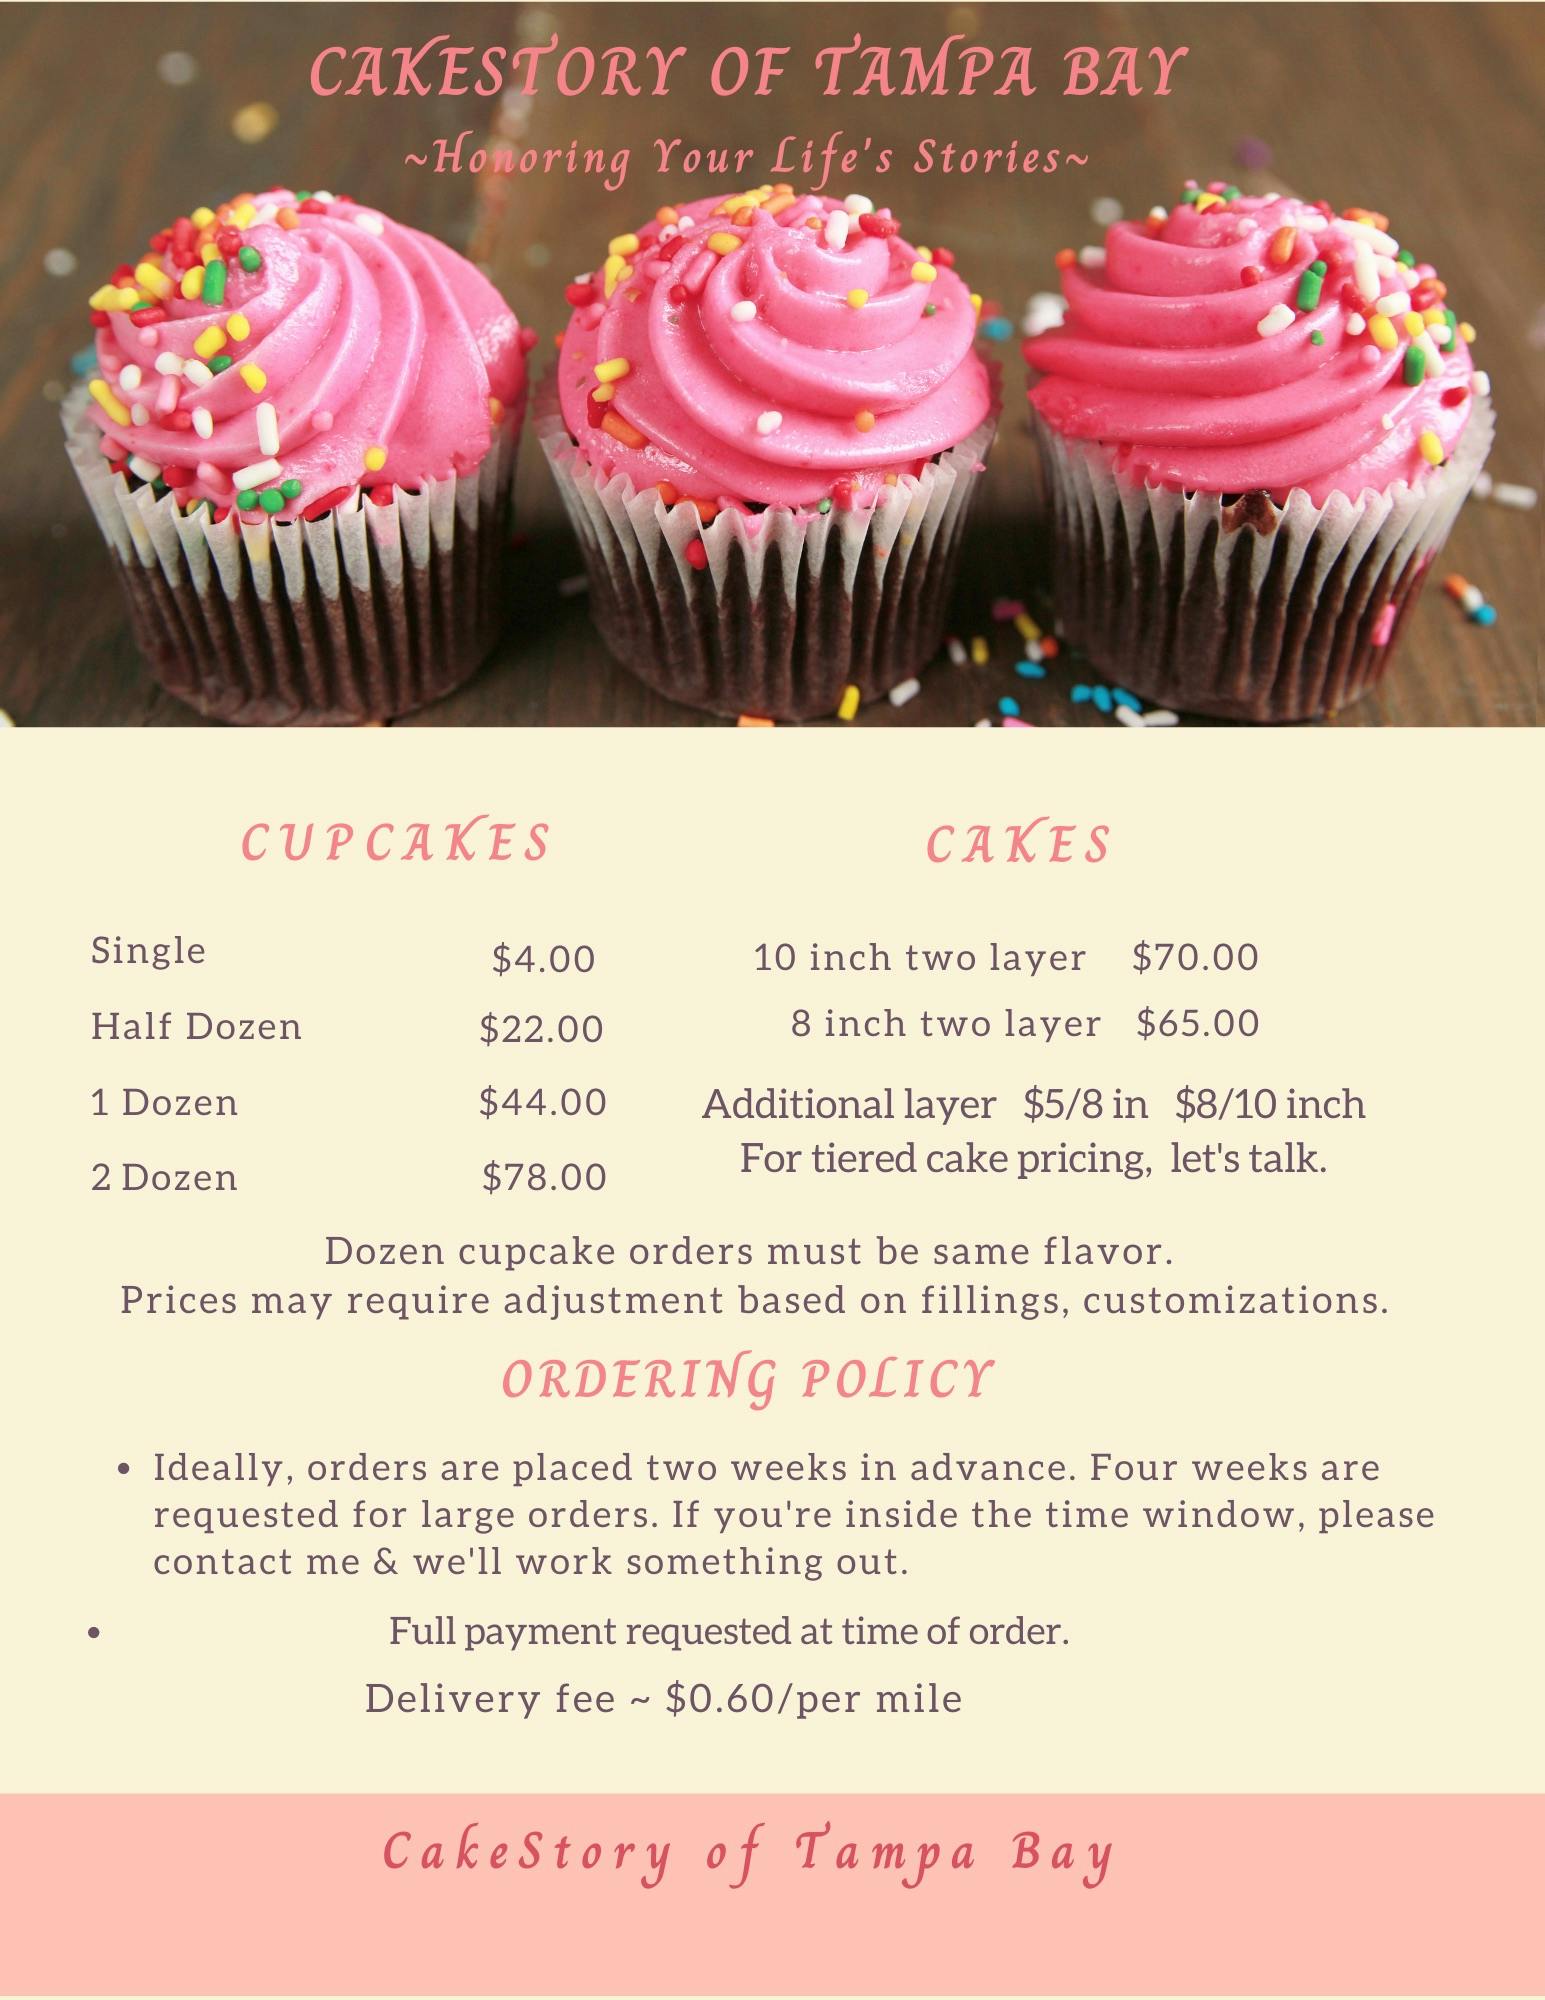 Pricing and ordering policy 